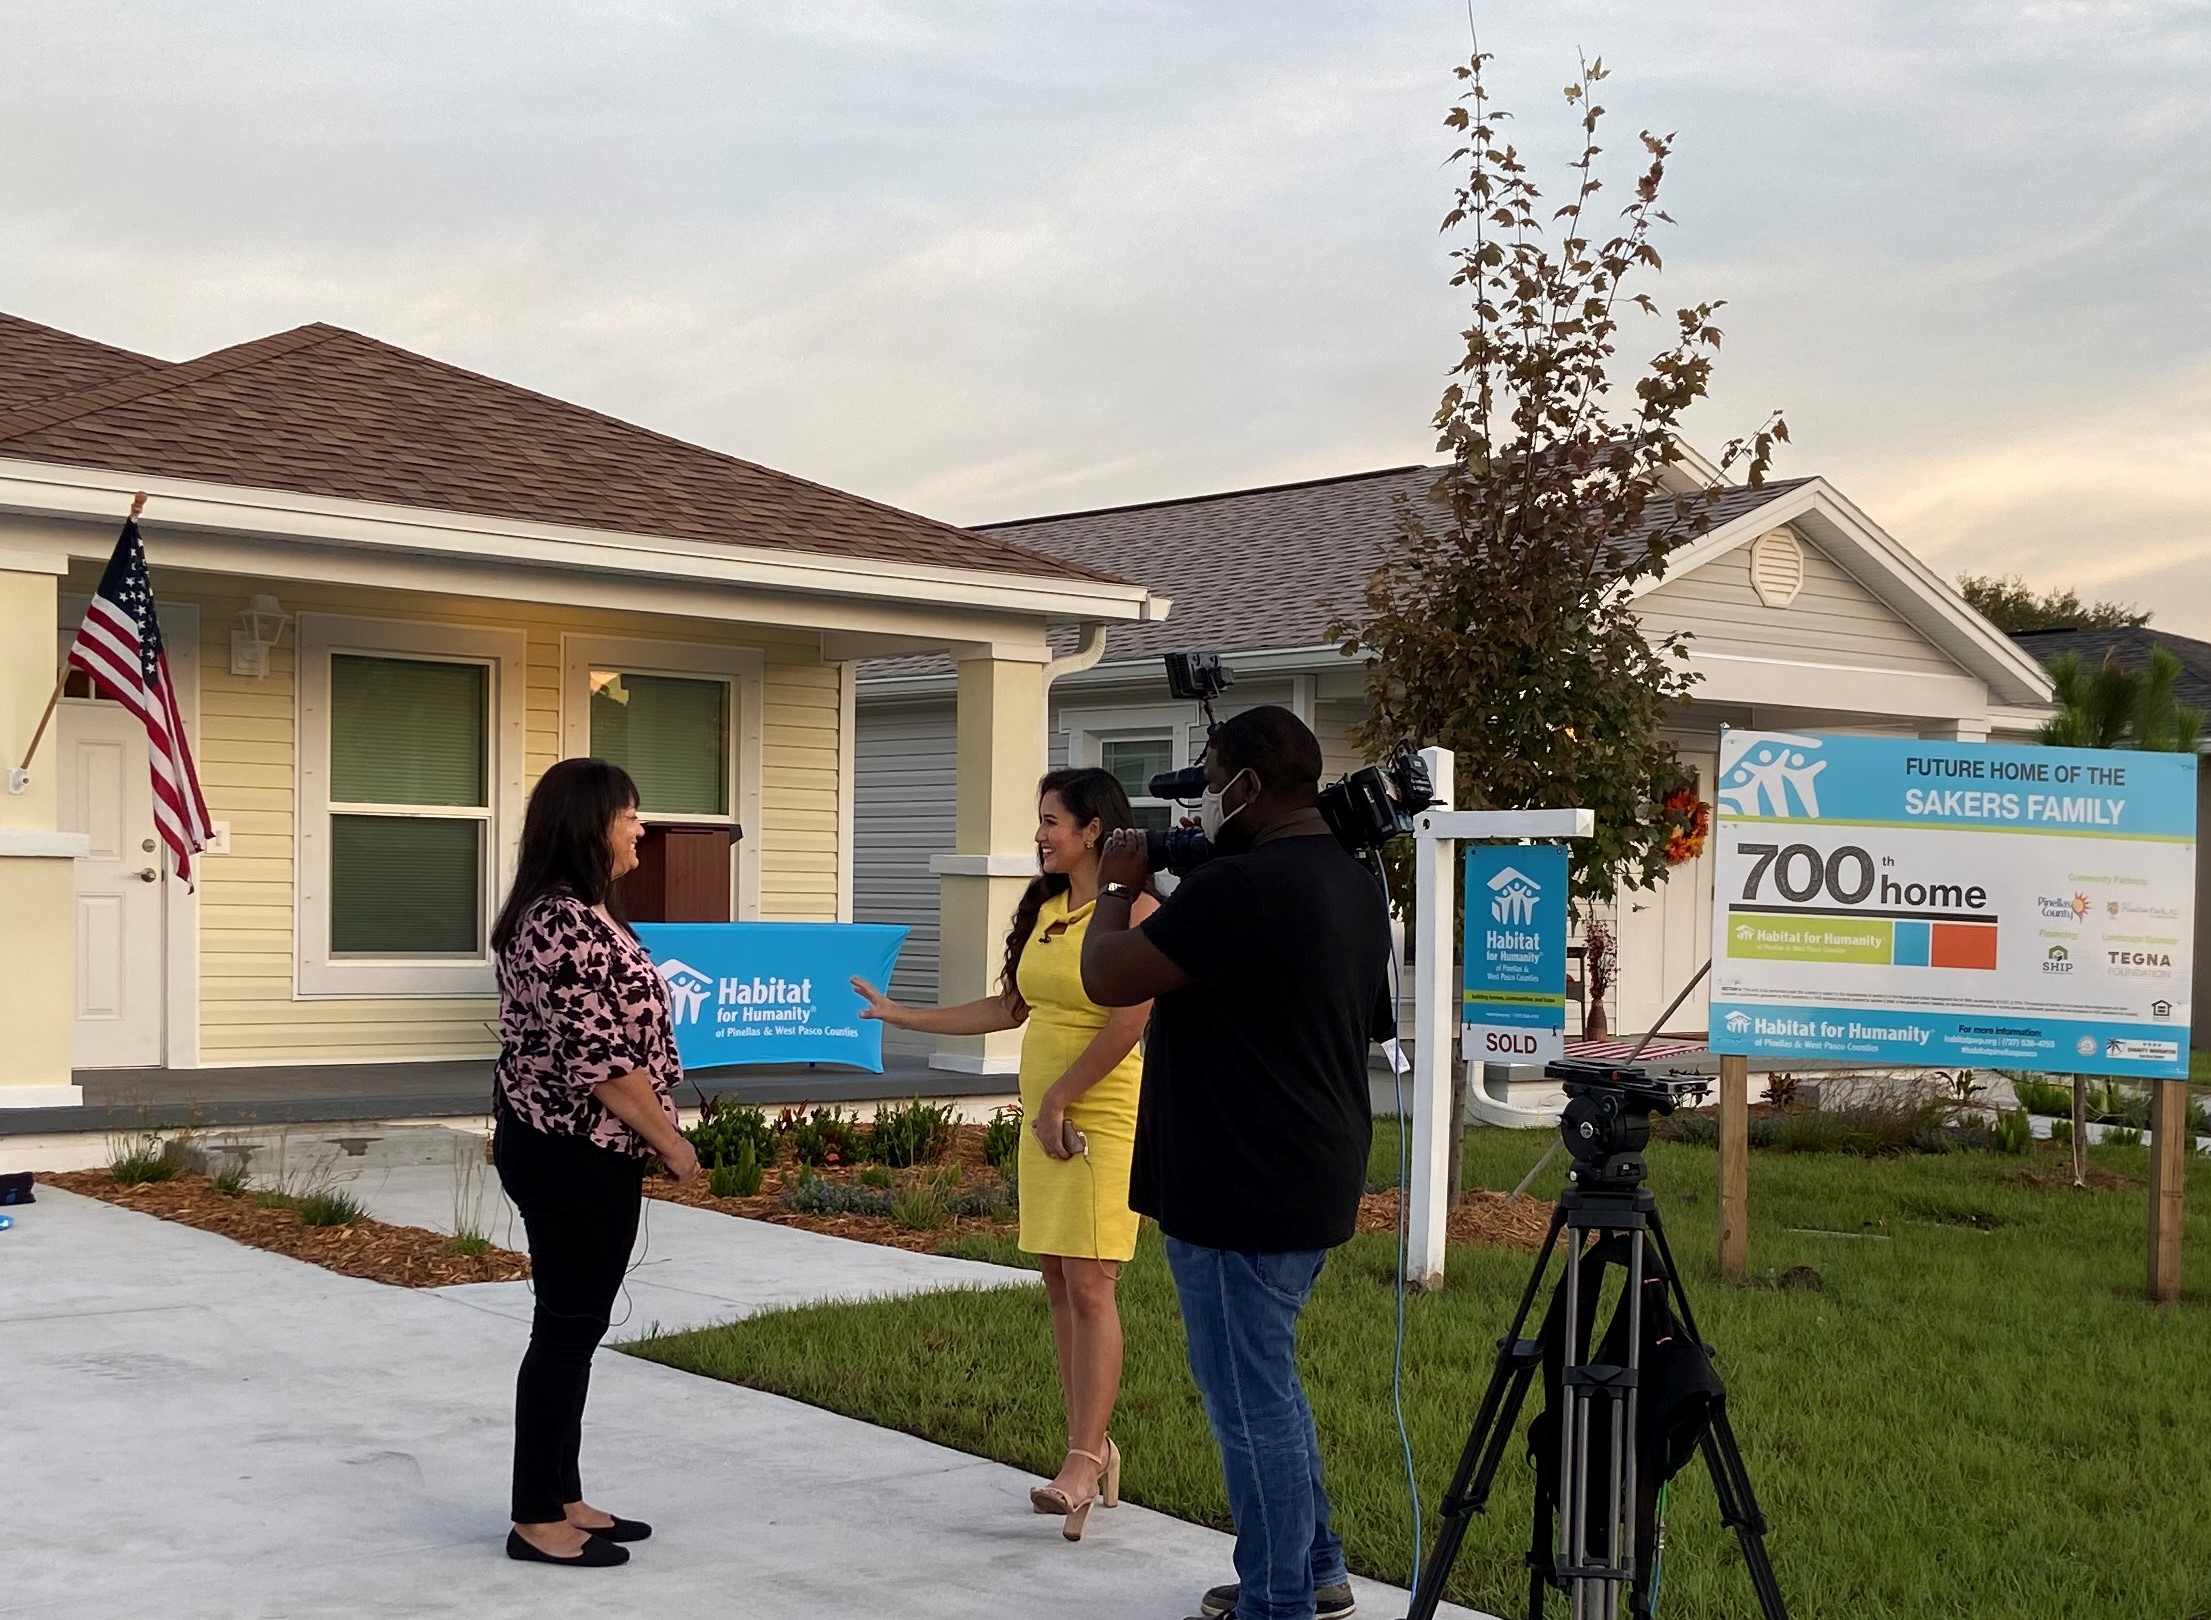 Habitat for Humanity of Pinellas and West Pasco Counties dedicates 700th home build